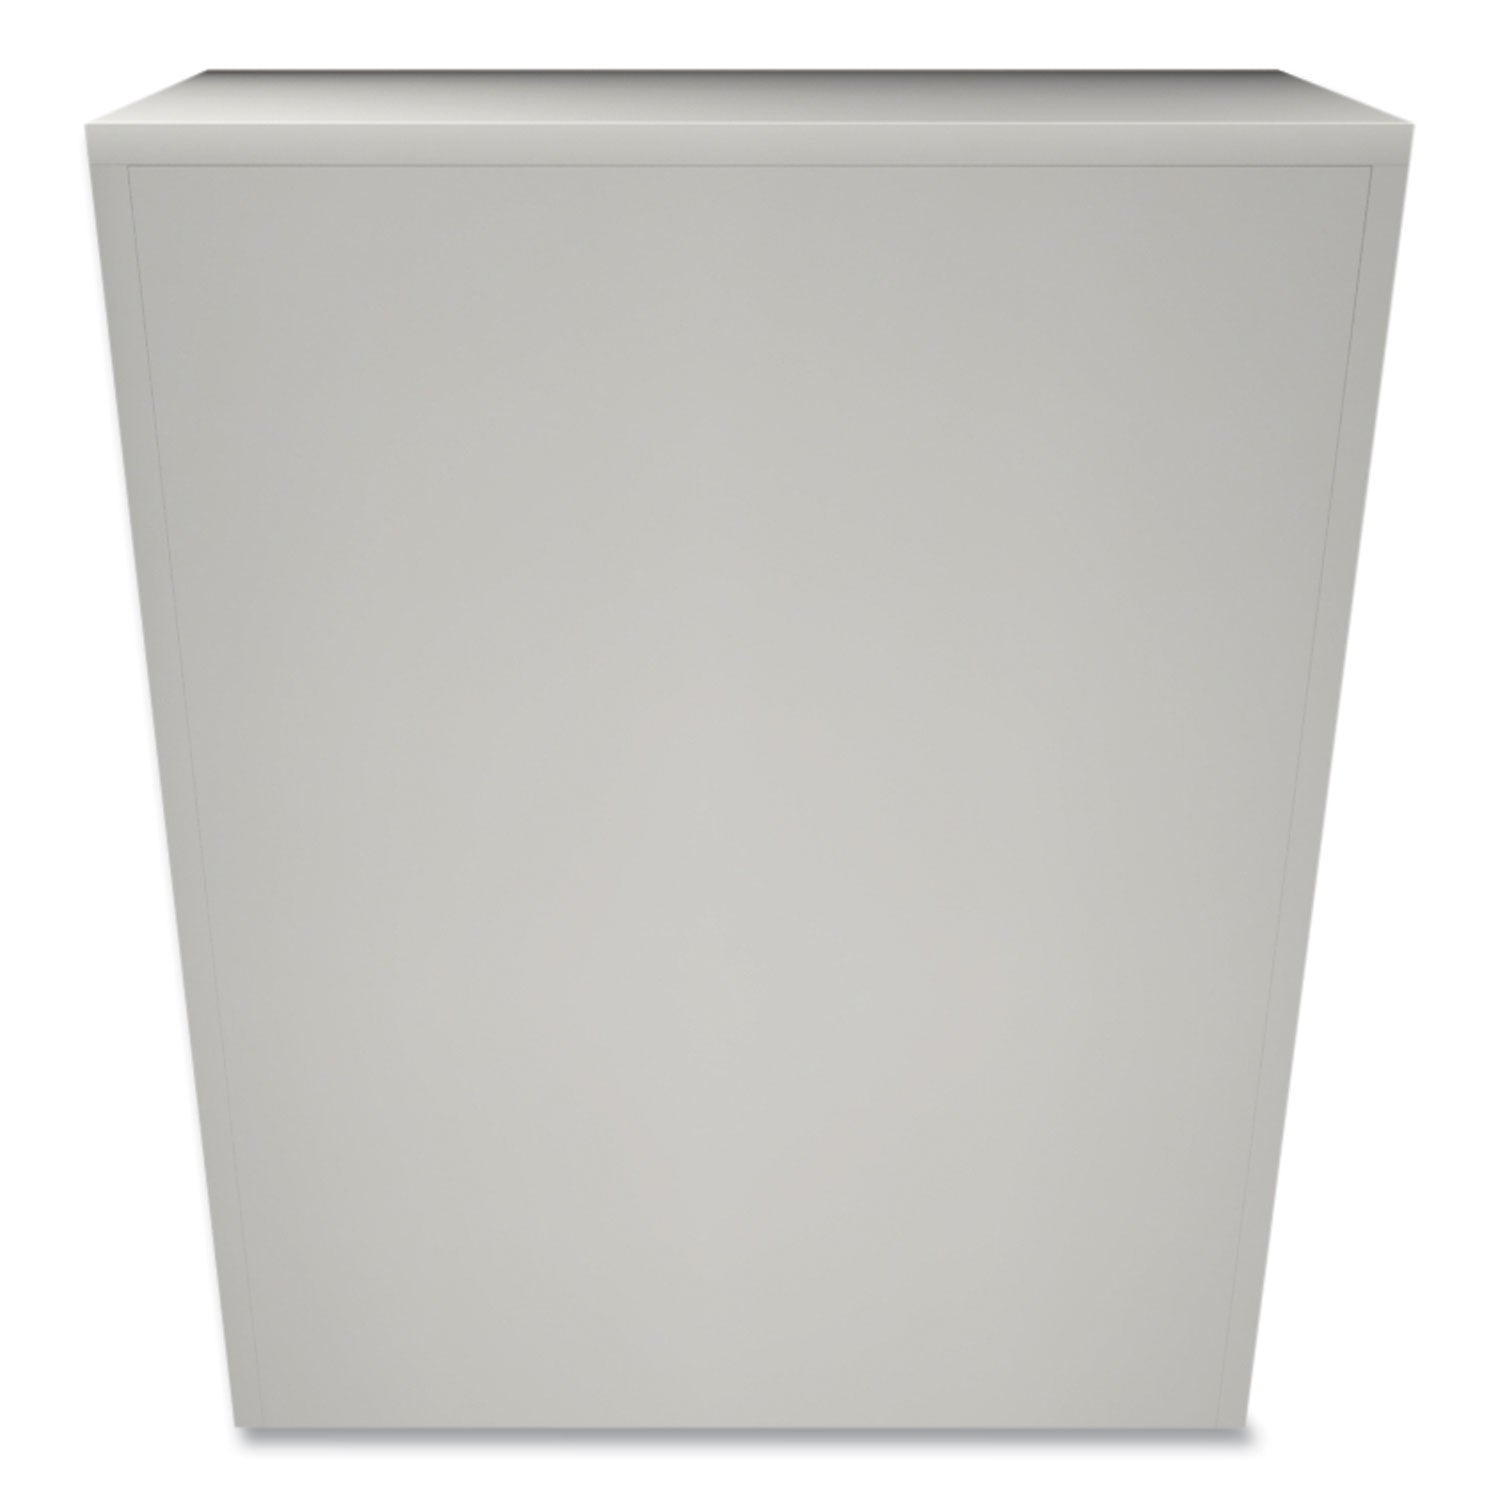 Brigade 700 Series Lateral File, 4 Legal/Letter-Size File Drawers, Light Gray, 42" x 18" x 52.5 - 